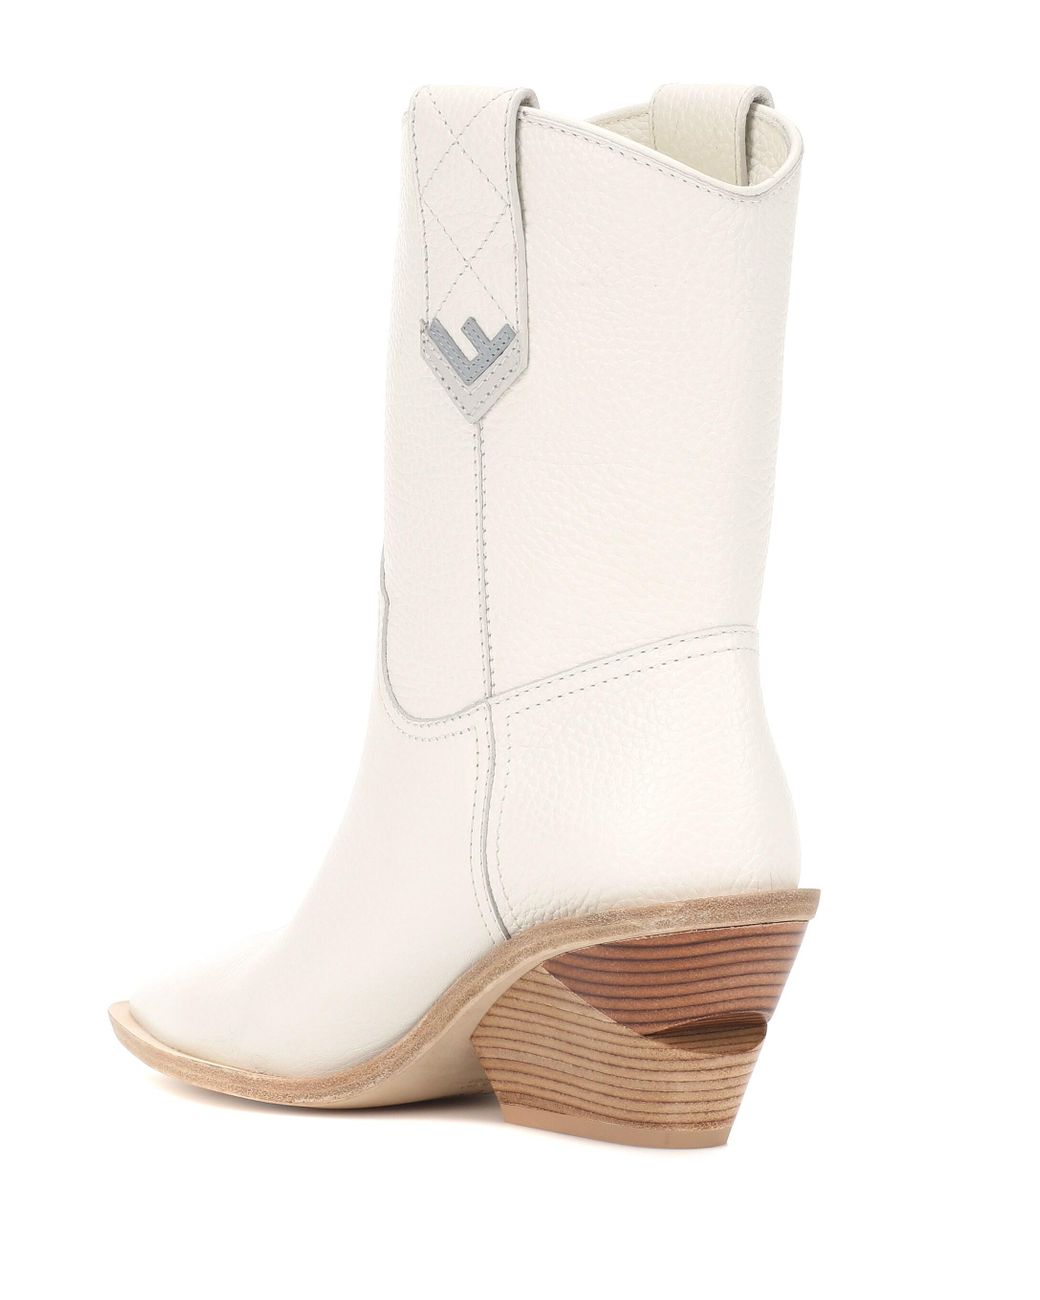 Fendi Leather Cowboy Boots in White | Lyst